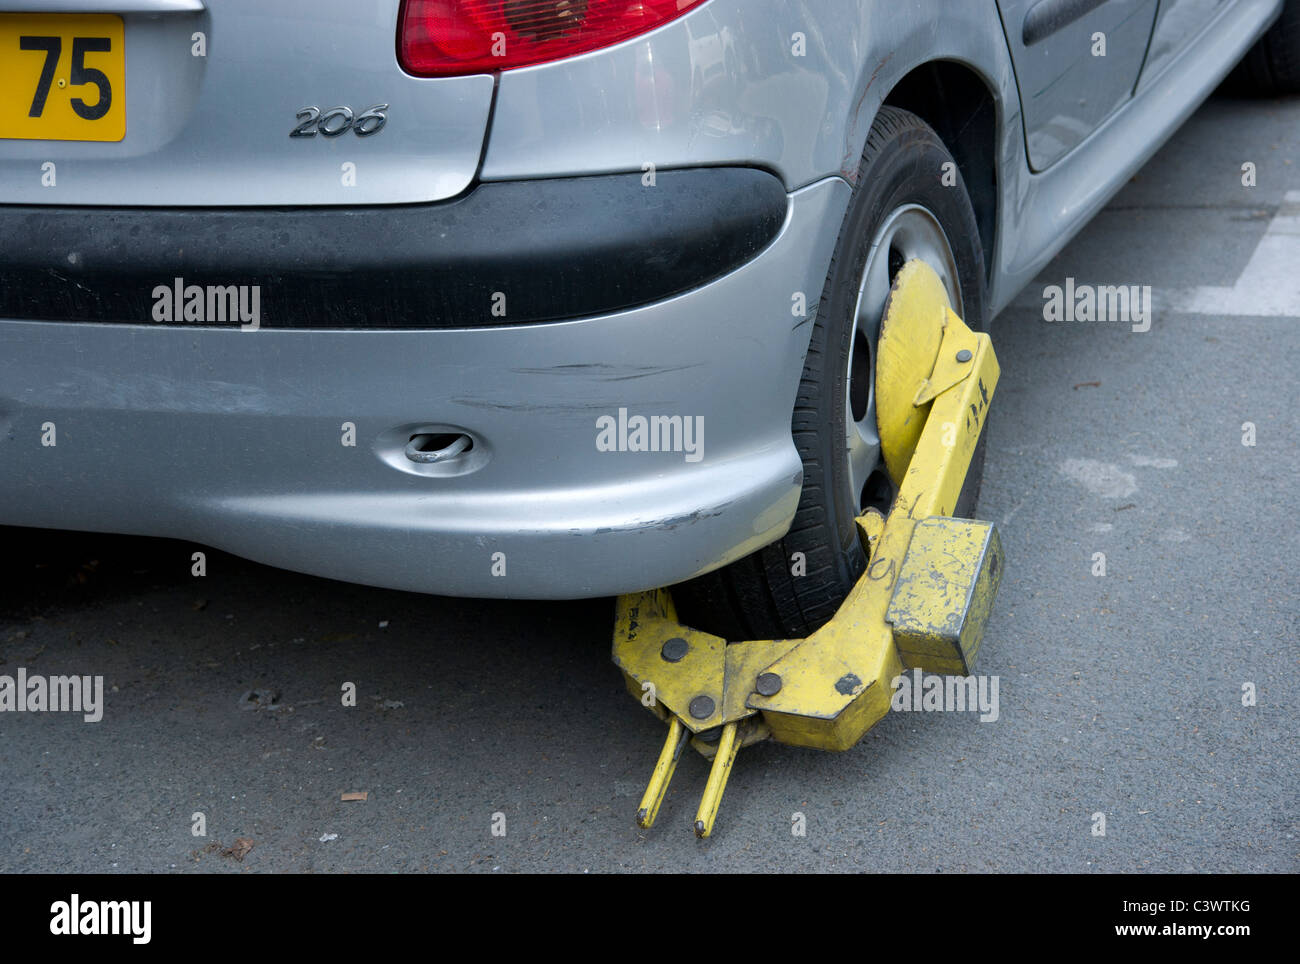 Parisian car showing 75 plate number, clamped in Paris, France Stock Photo